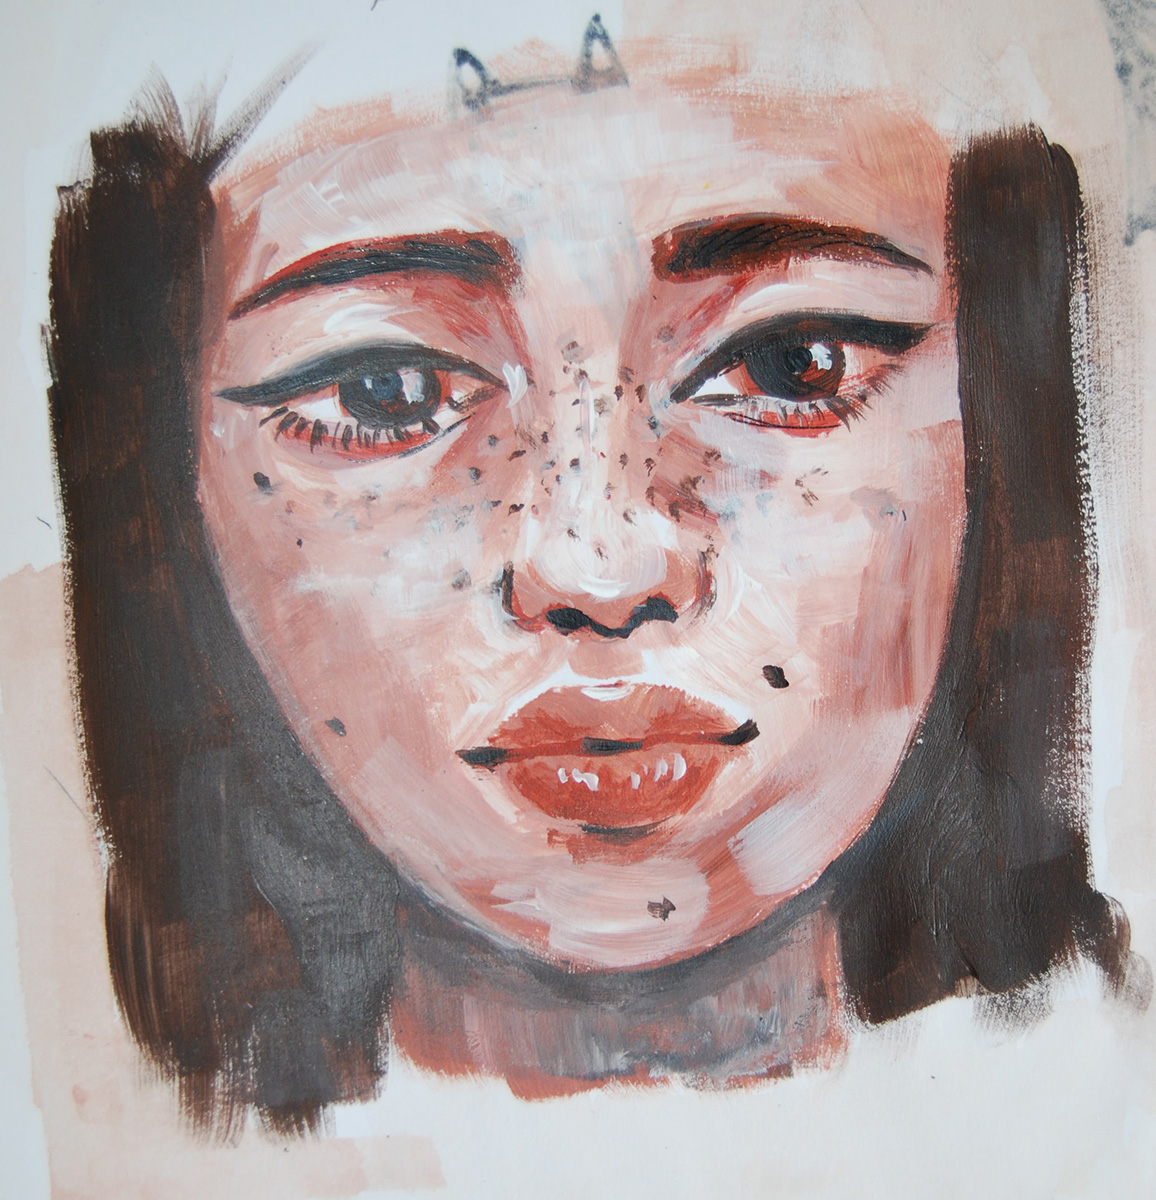 incomplete painting of the head of a young woman with dark hair